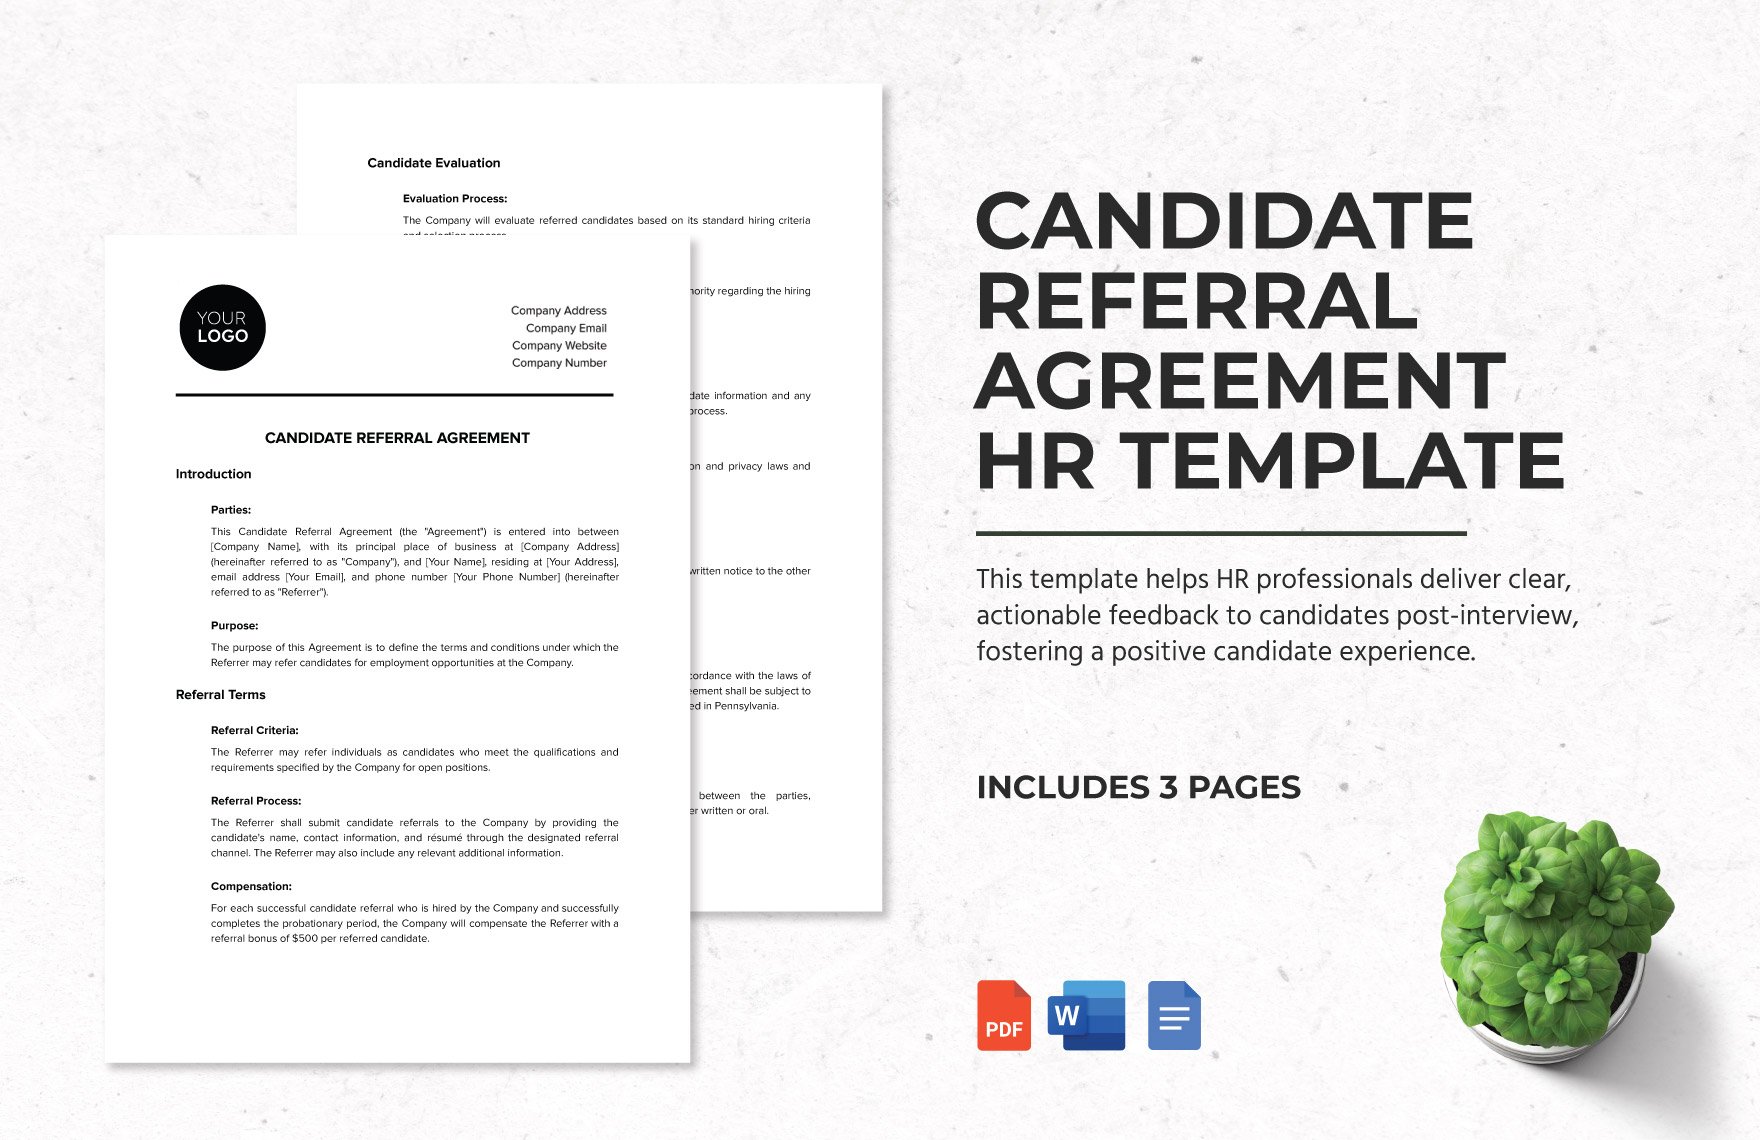 Candidate Referral Agreement HR Template